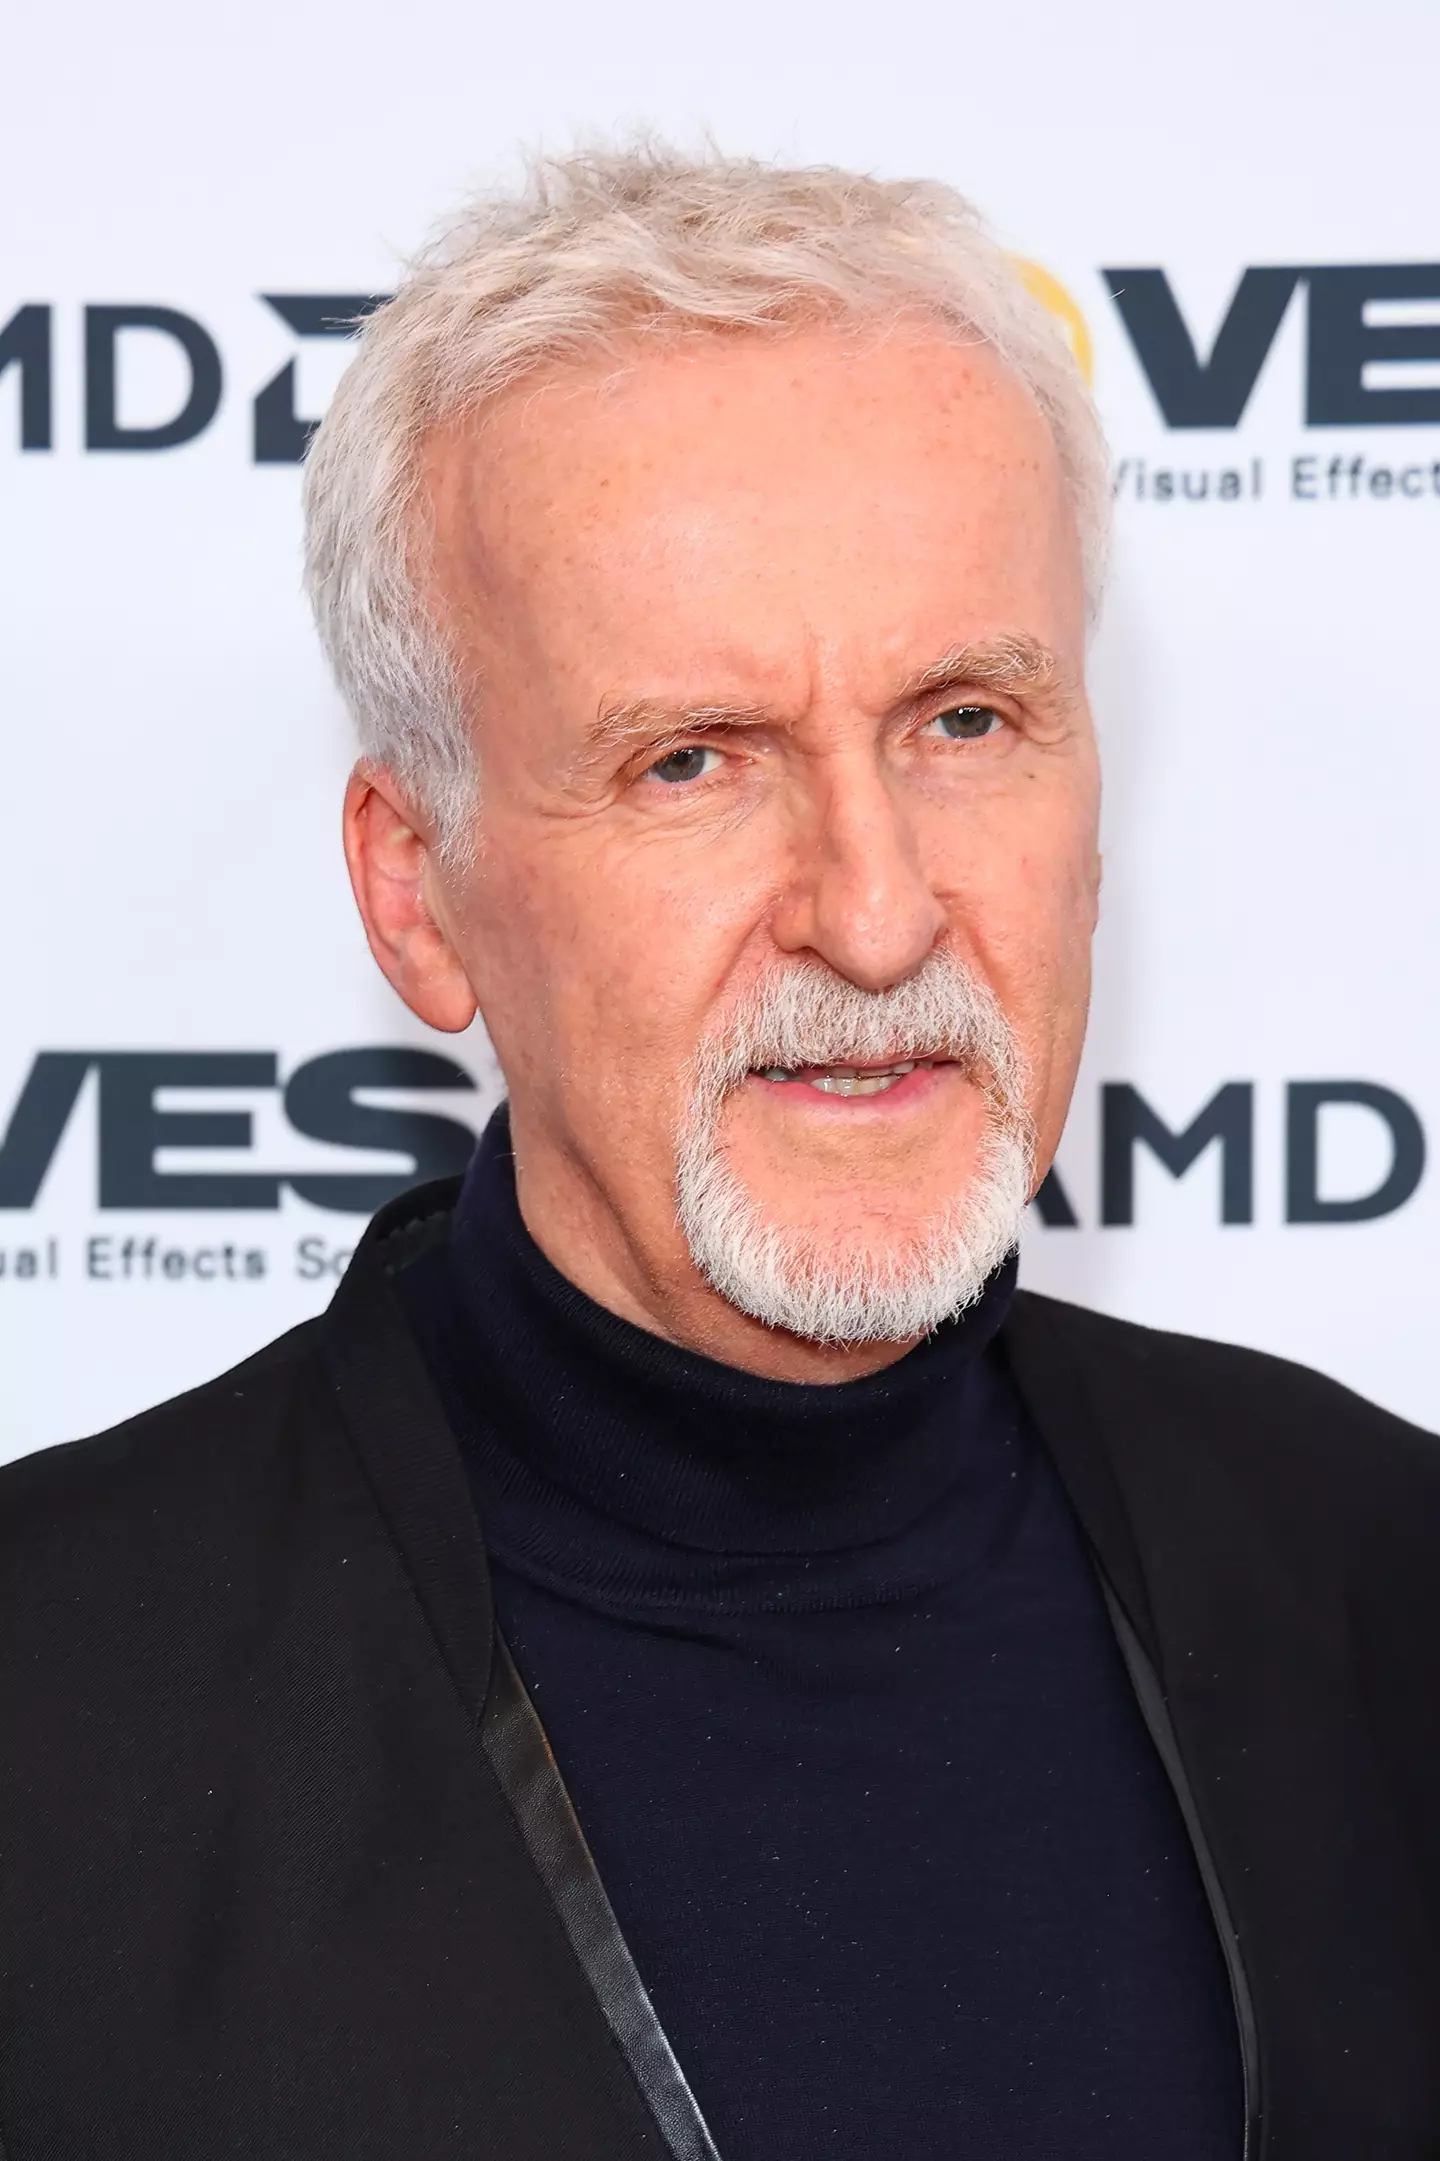 James Cameron has hit back at claims he's working on a film about the Titan submarine.